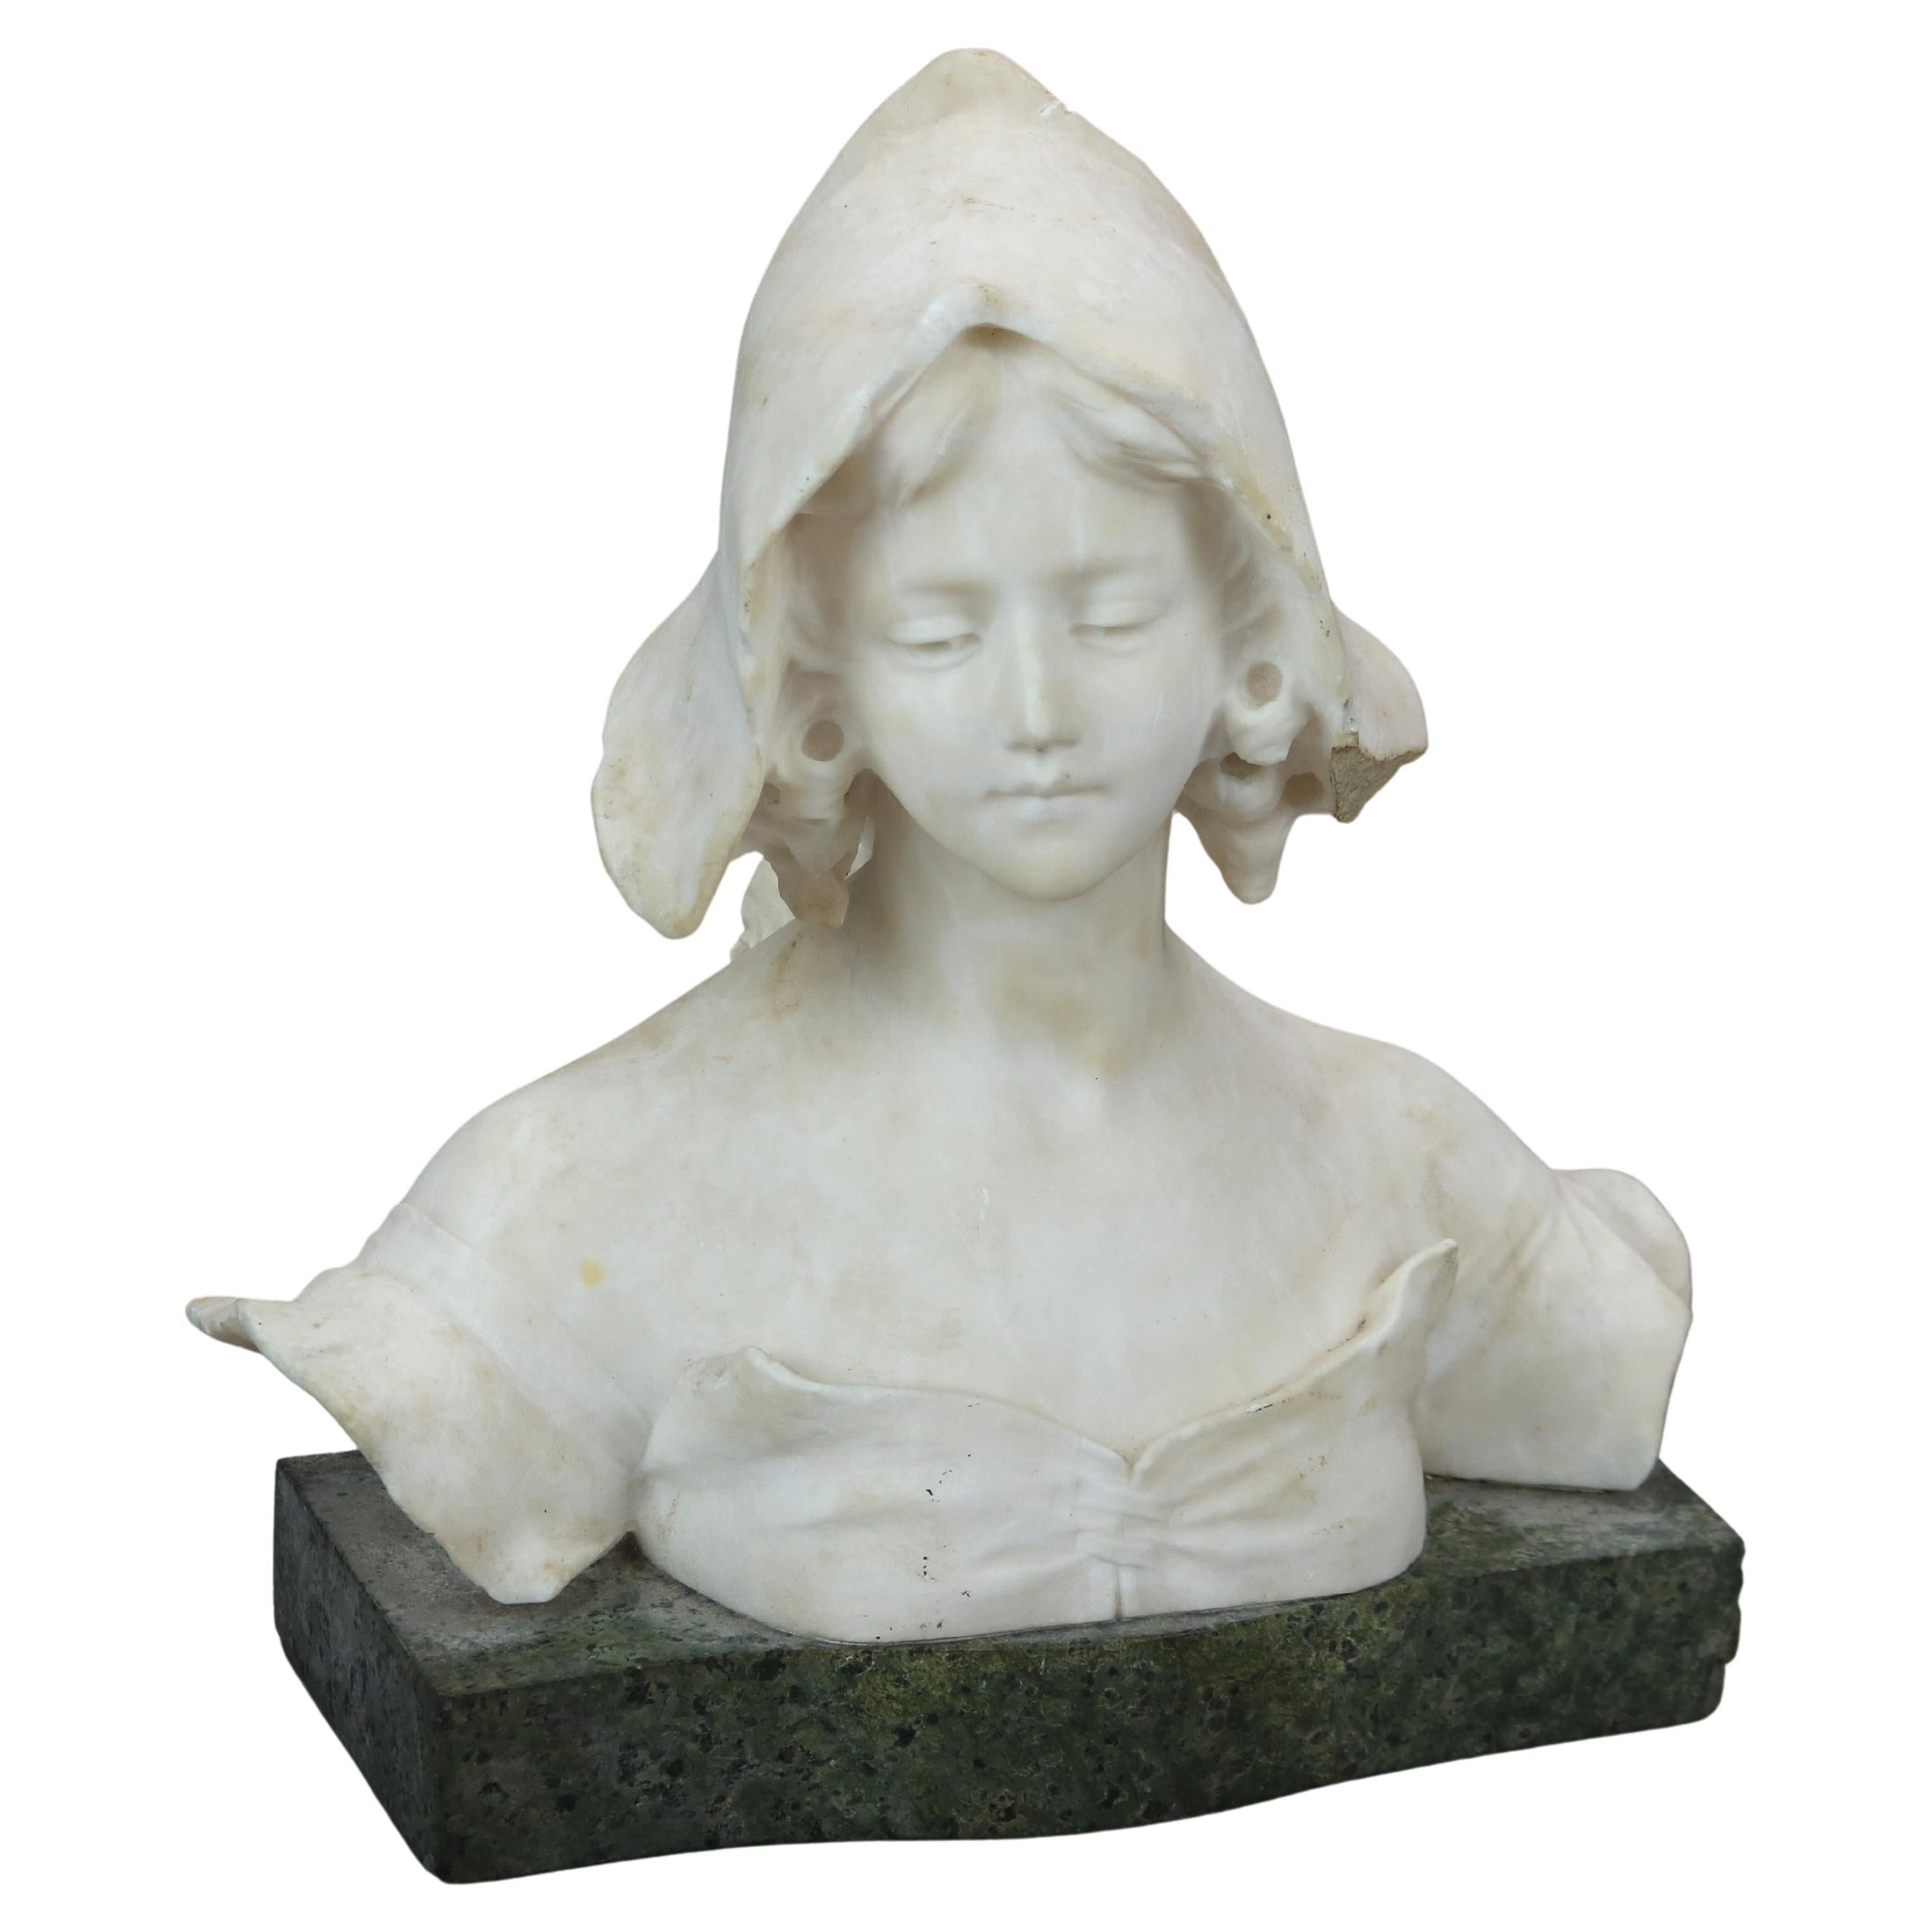 Carved Alabaster Portrait Sculpture of a Young Woman, Green Marble Plinth c1900